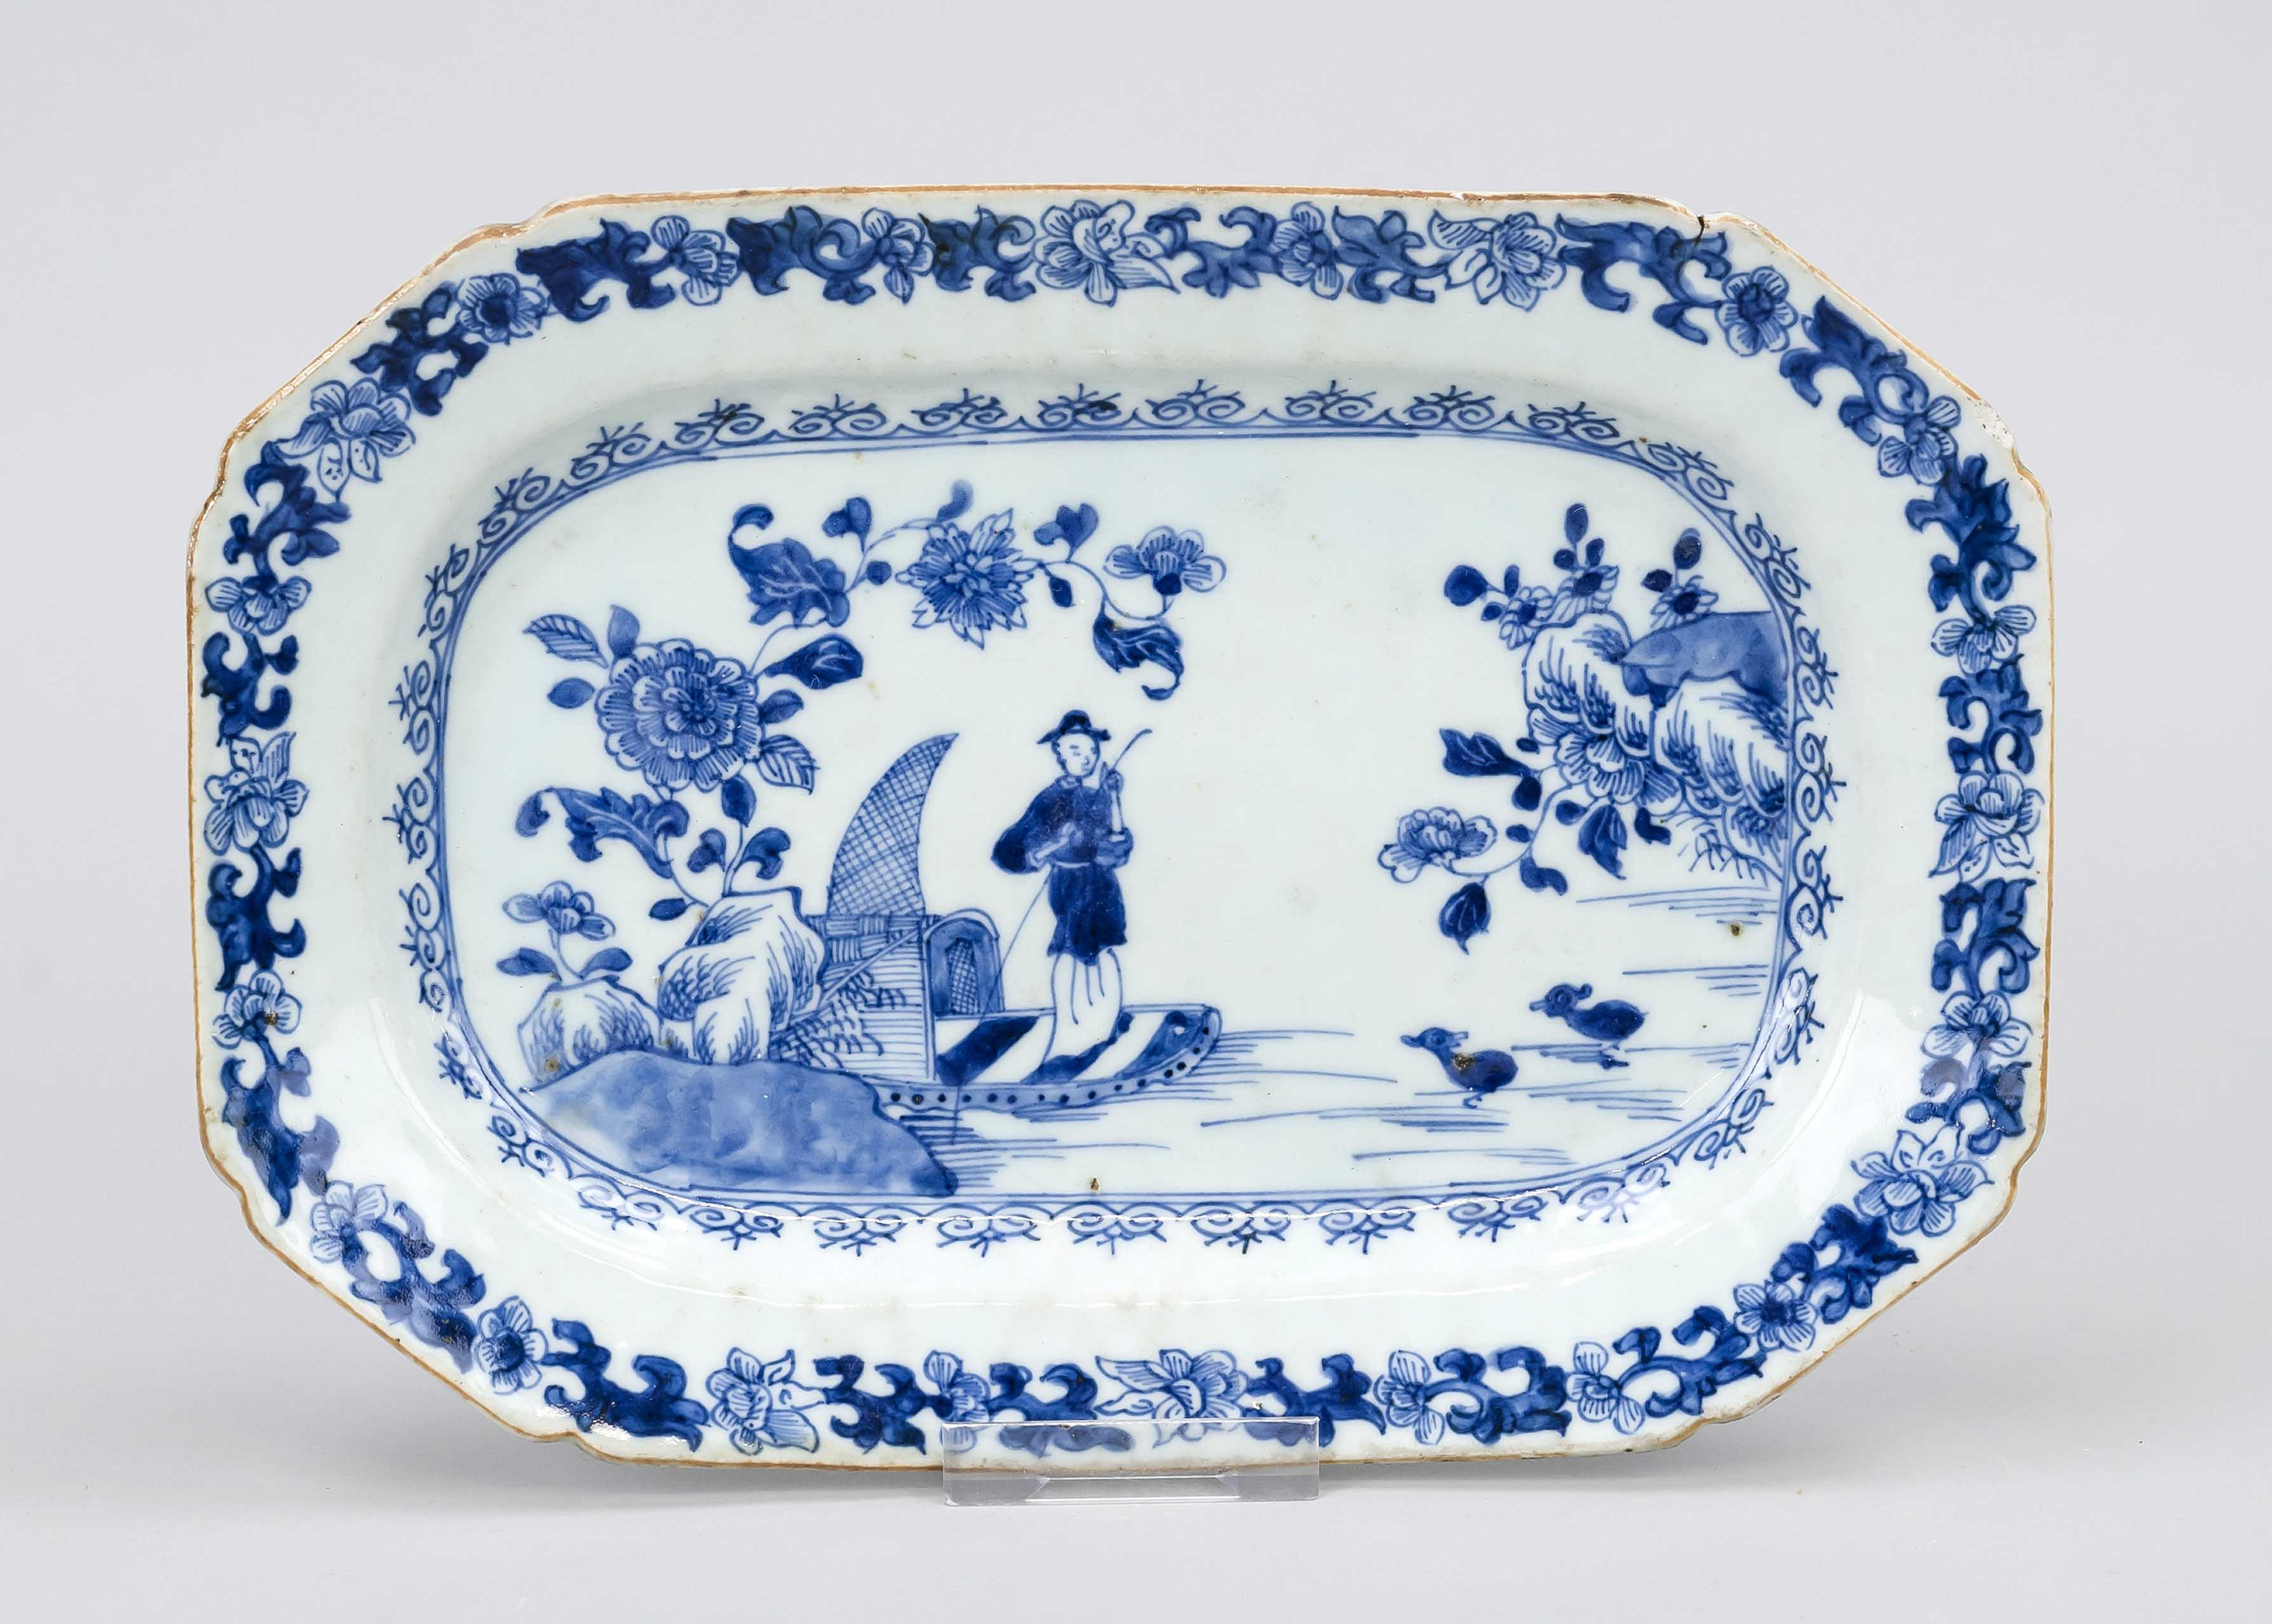 Blue and white plate, China, 18th century, cobalt blue decoration with fisherman, flag with flower